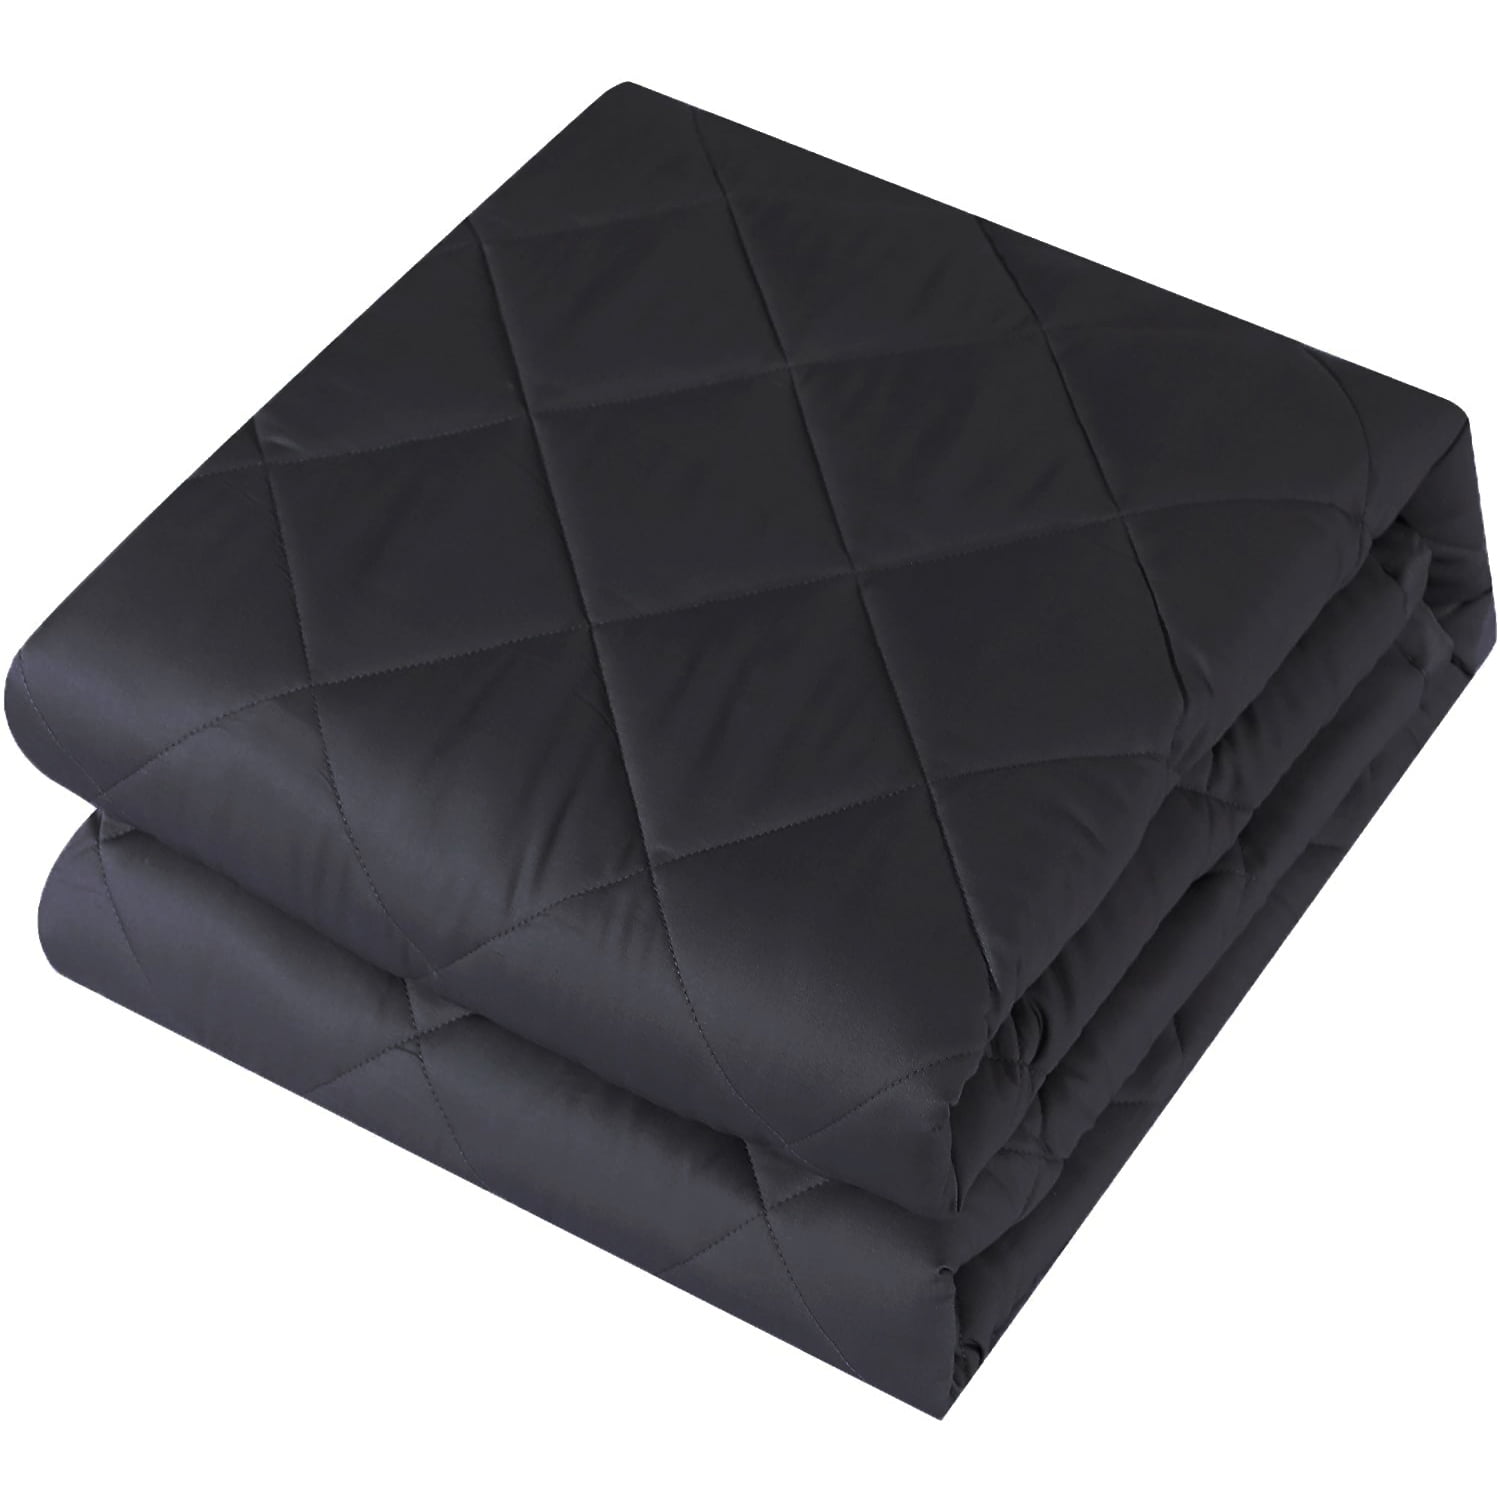 Weighted Blanket for Adult 15 lbs Heavy Blanket Cotton Material with